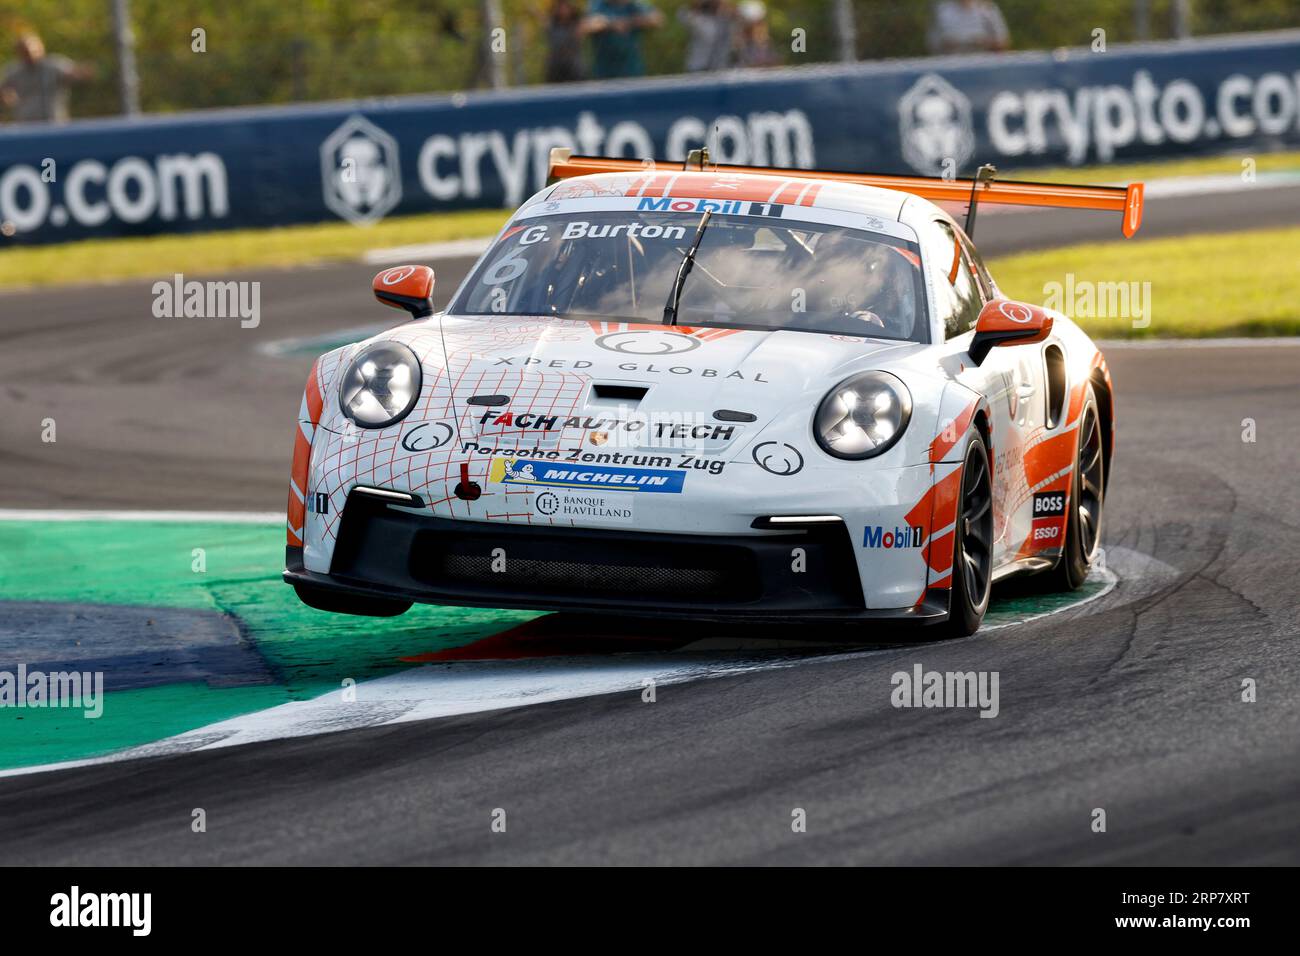 Monza, Italy. 1st Sep, 2023. #6 Gustav Burton (UK, Fach Auto Tech), Porsche Mobil 1 Supercup at Autodromo Nazionale Monza on September 1, 2023 in Monza, Italy. (Photo by HIGH TWO) Credit: dpa/Alamy Live News Stock Photo